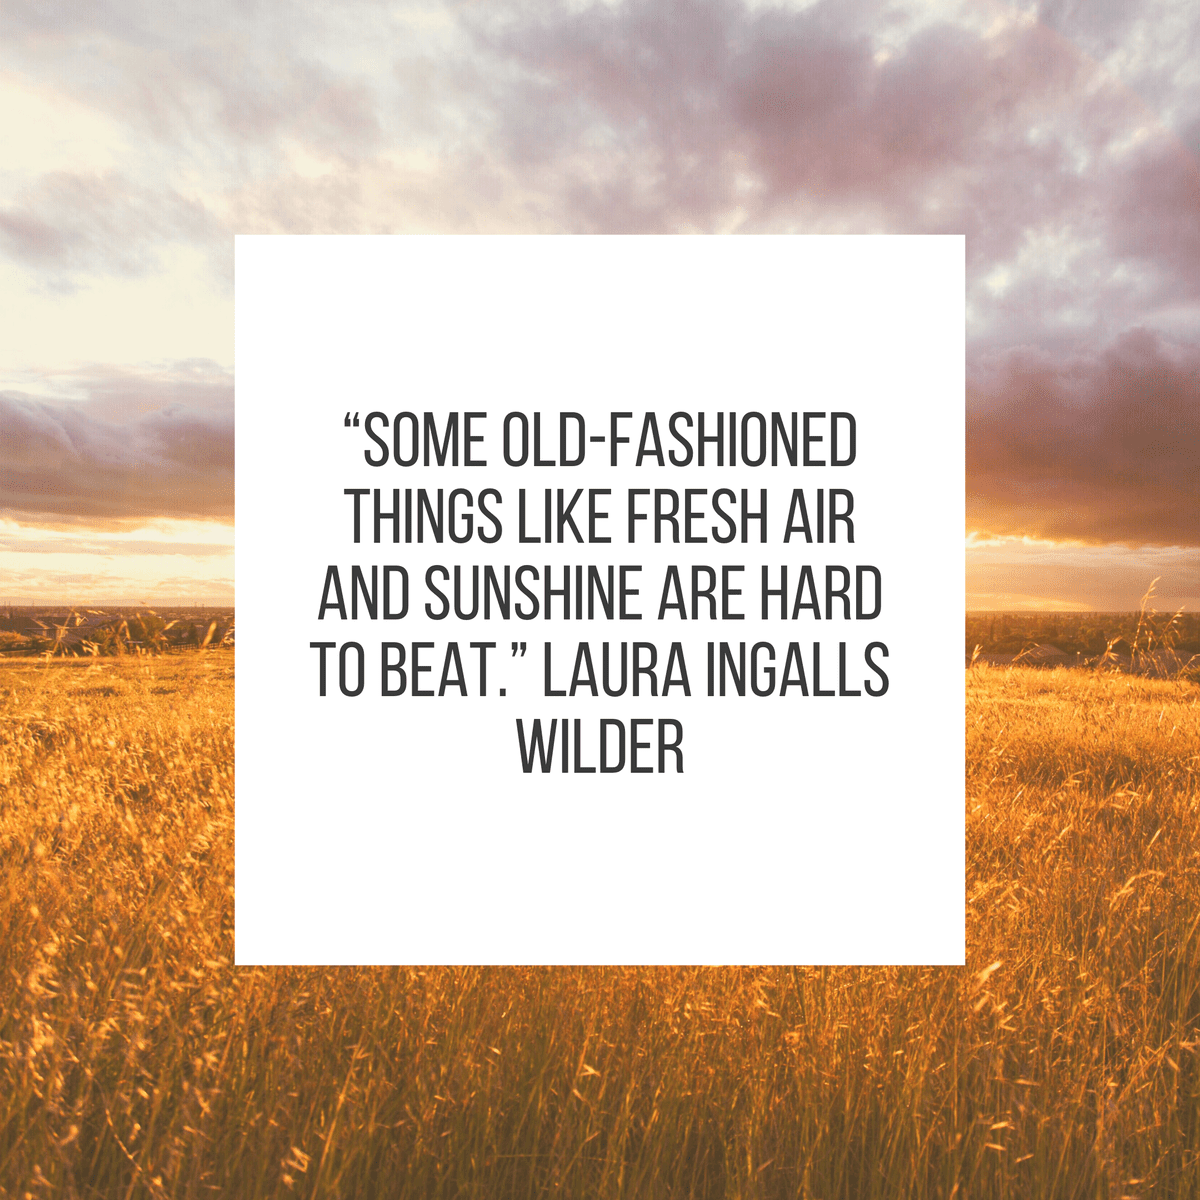 “Some old-fashioned things like fresh air and sunshine are hard to beat.” Laura Ingalls Wilder